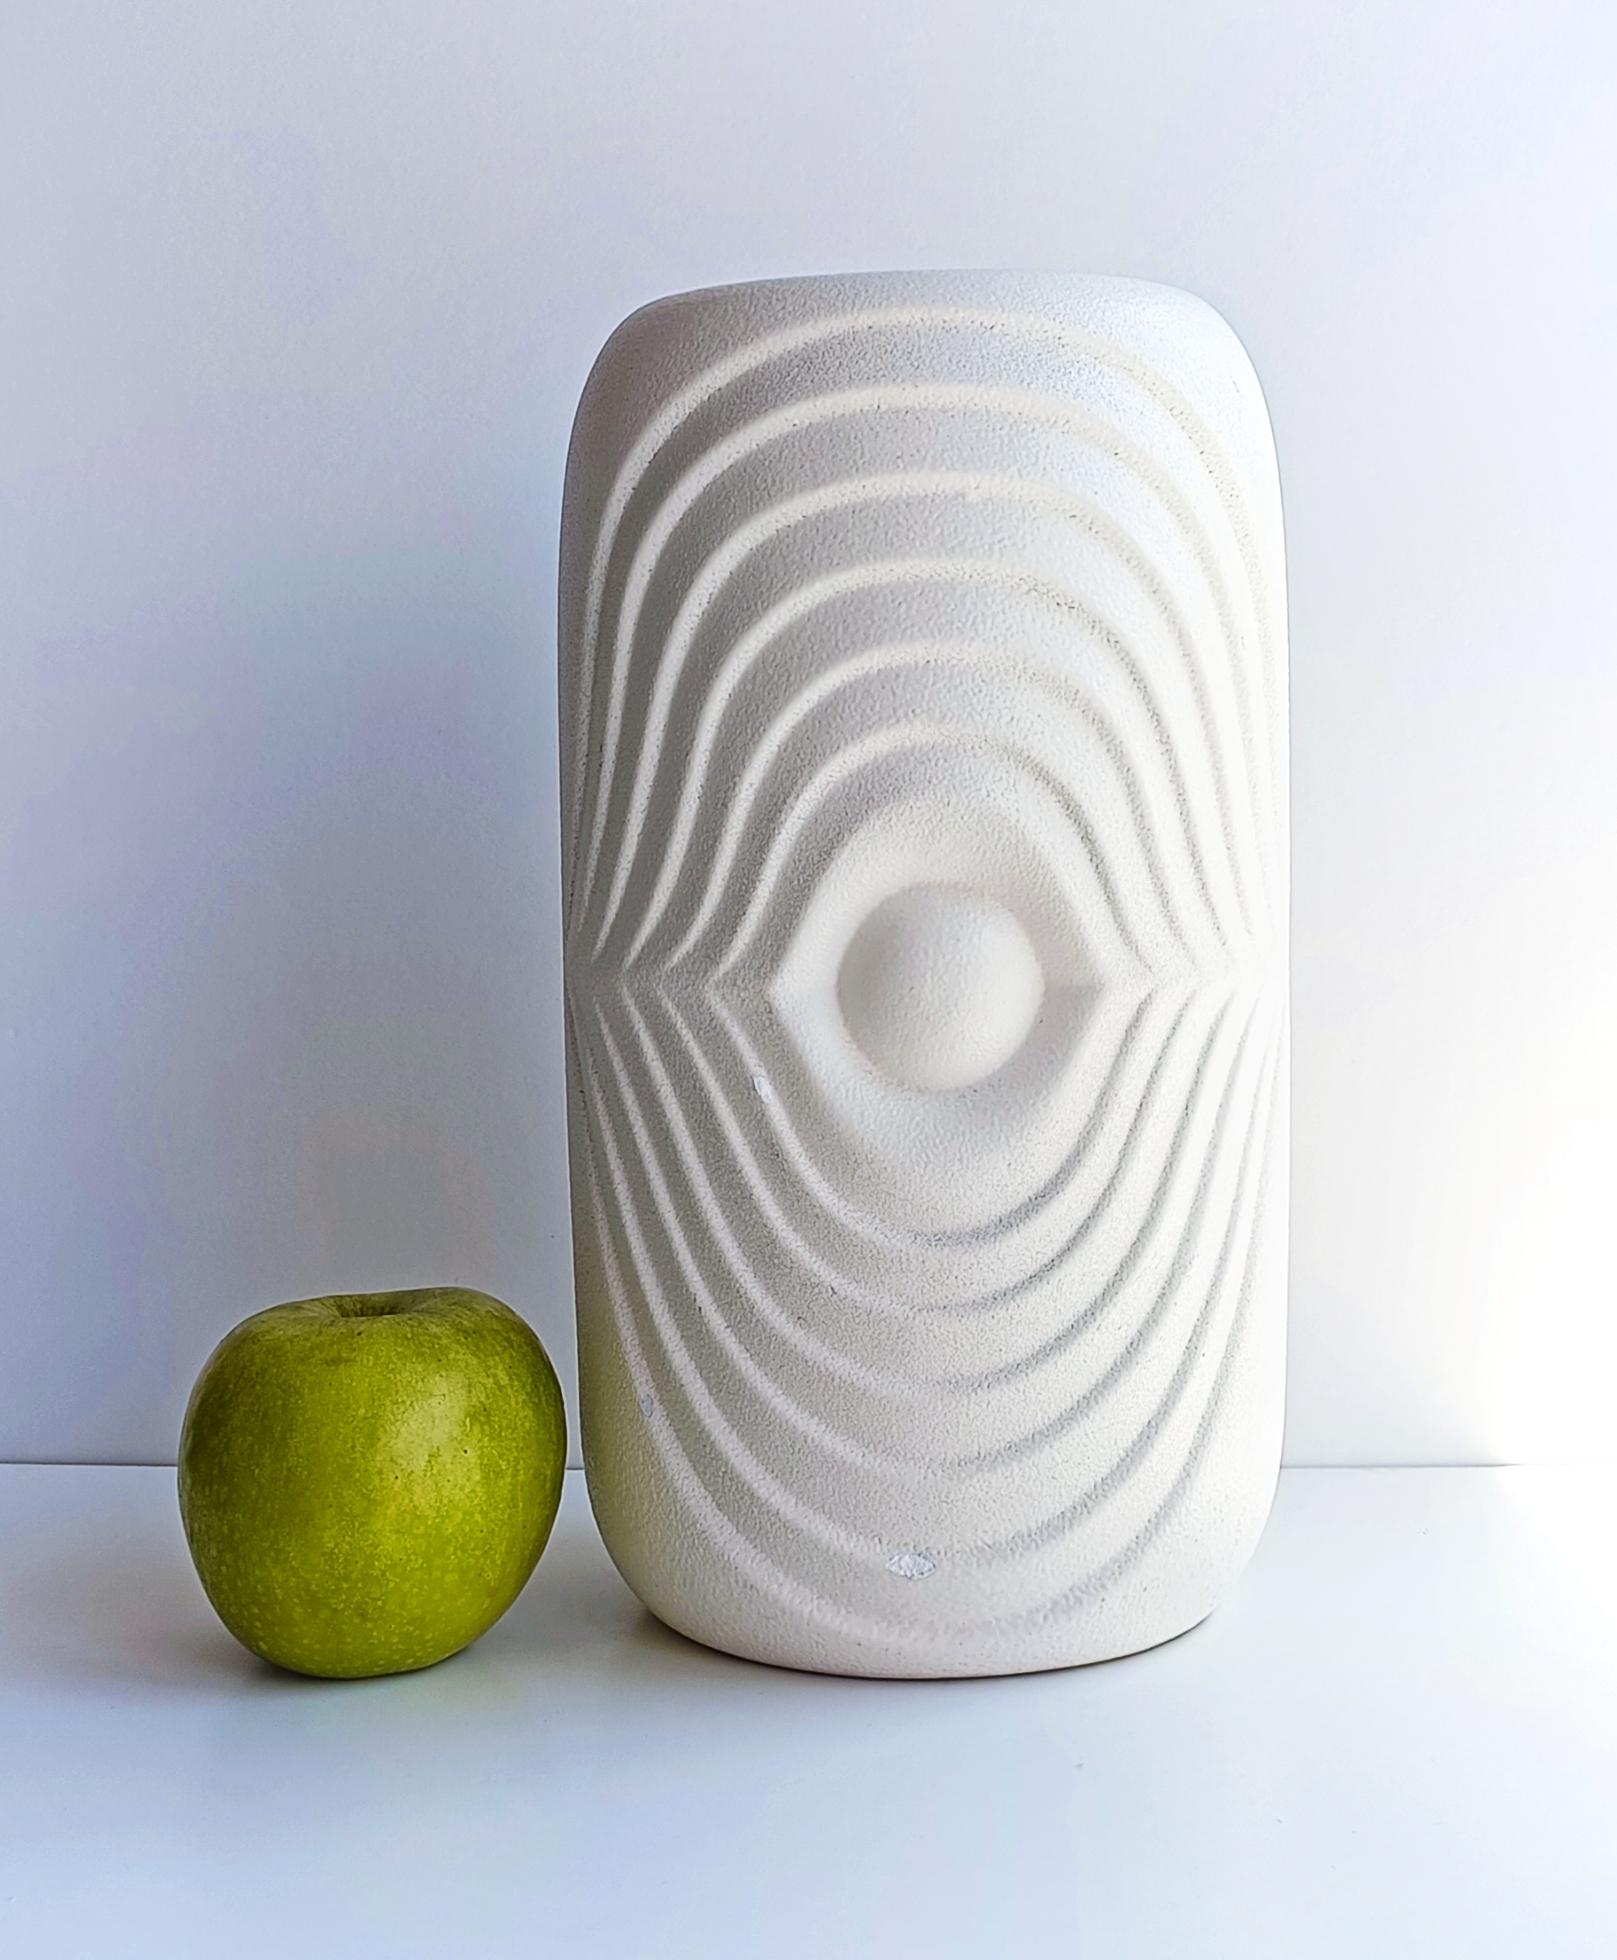 Royal Bavaria KPM Op Art Ceramic Vase. Hand produced in Germany, circa the 1960s.

It's a beautiful vase with a sculpture feel about it. 

Measurements:

H. 27cm/ 10.75in
Perimeter 46cm/ 18in
W. 15xm/ 6in

